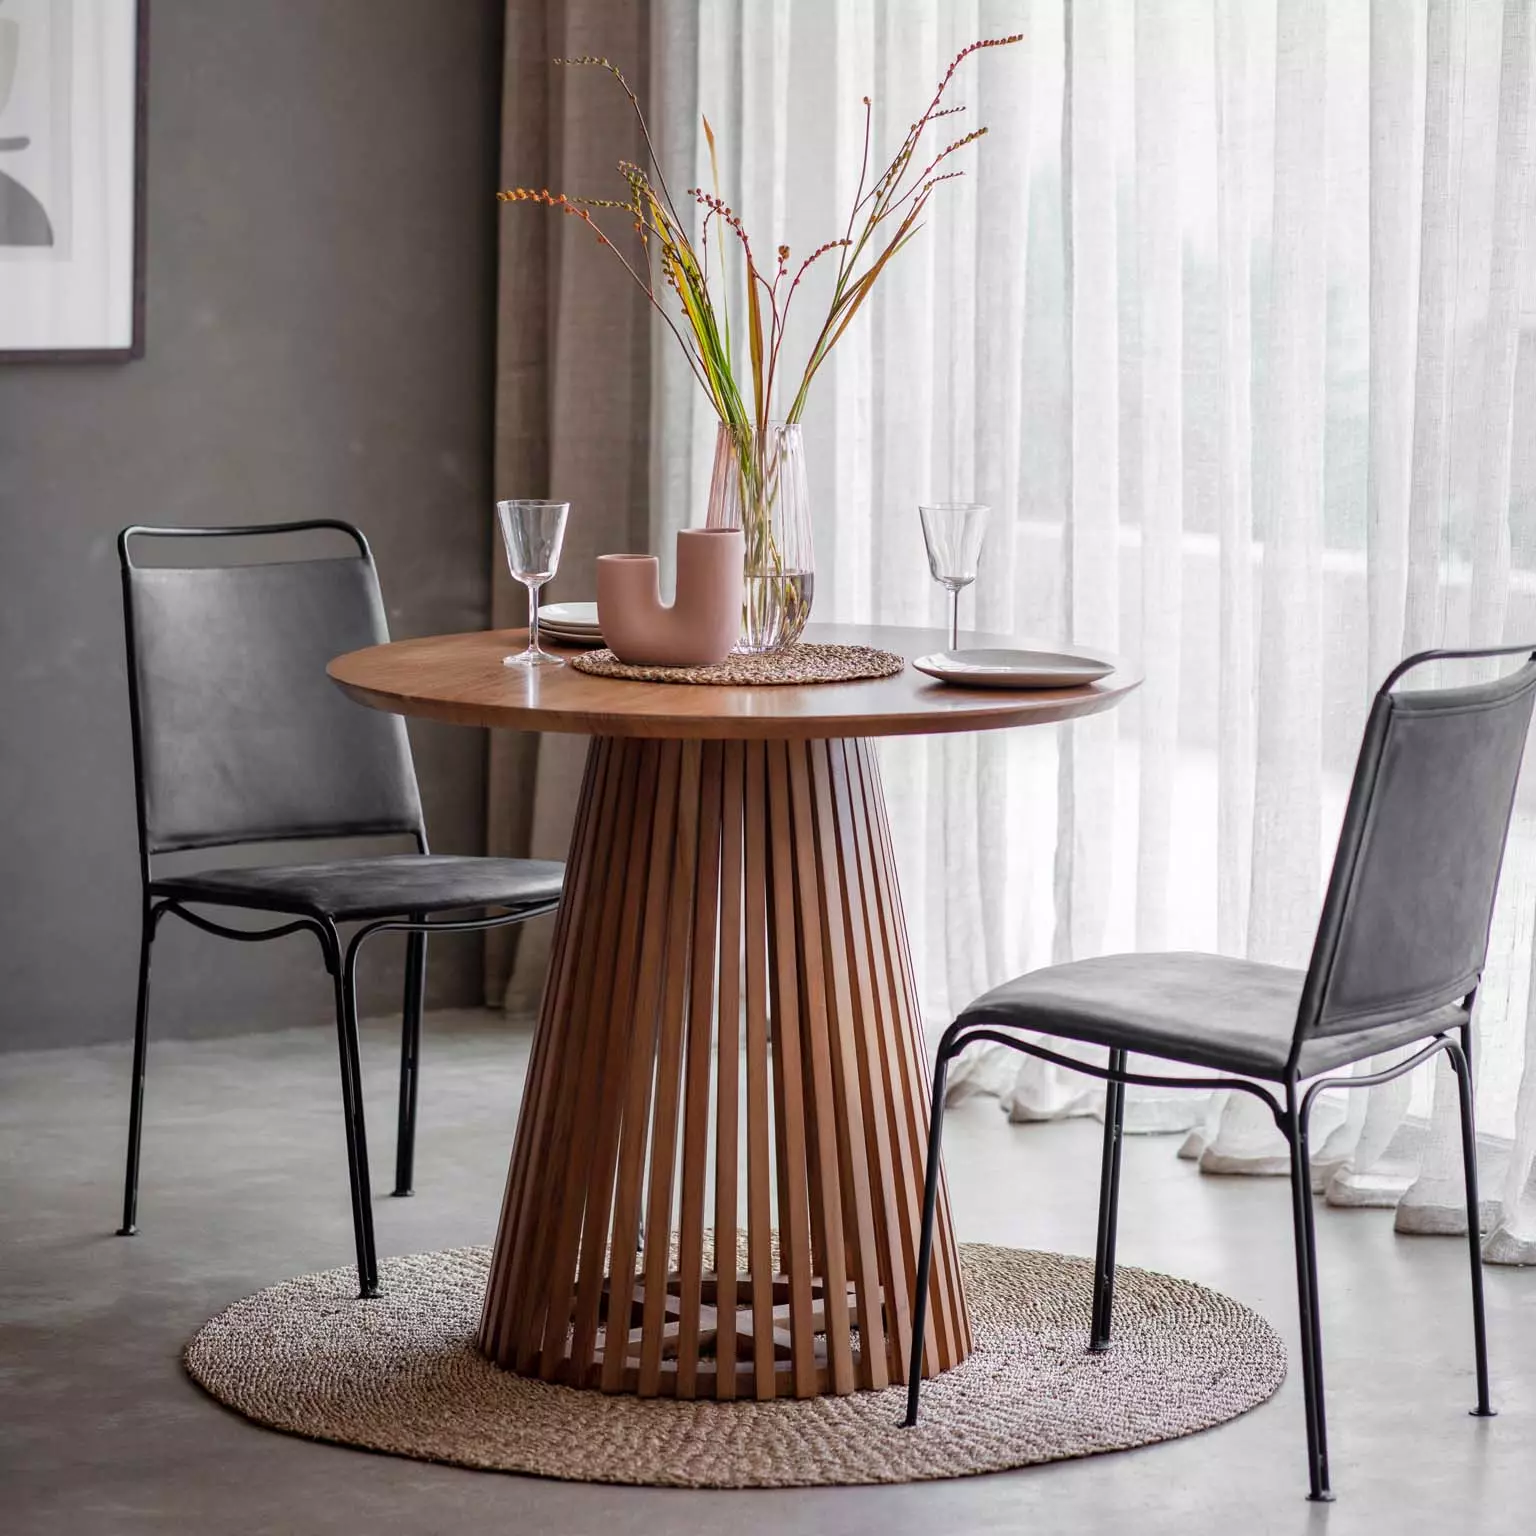 BROOKLAND Slatted Dining Table